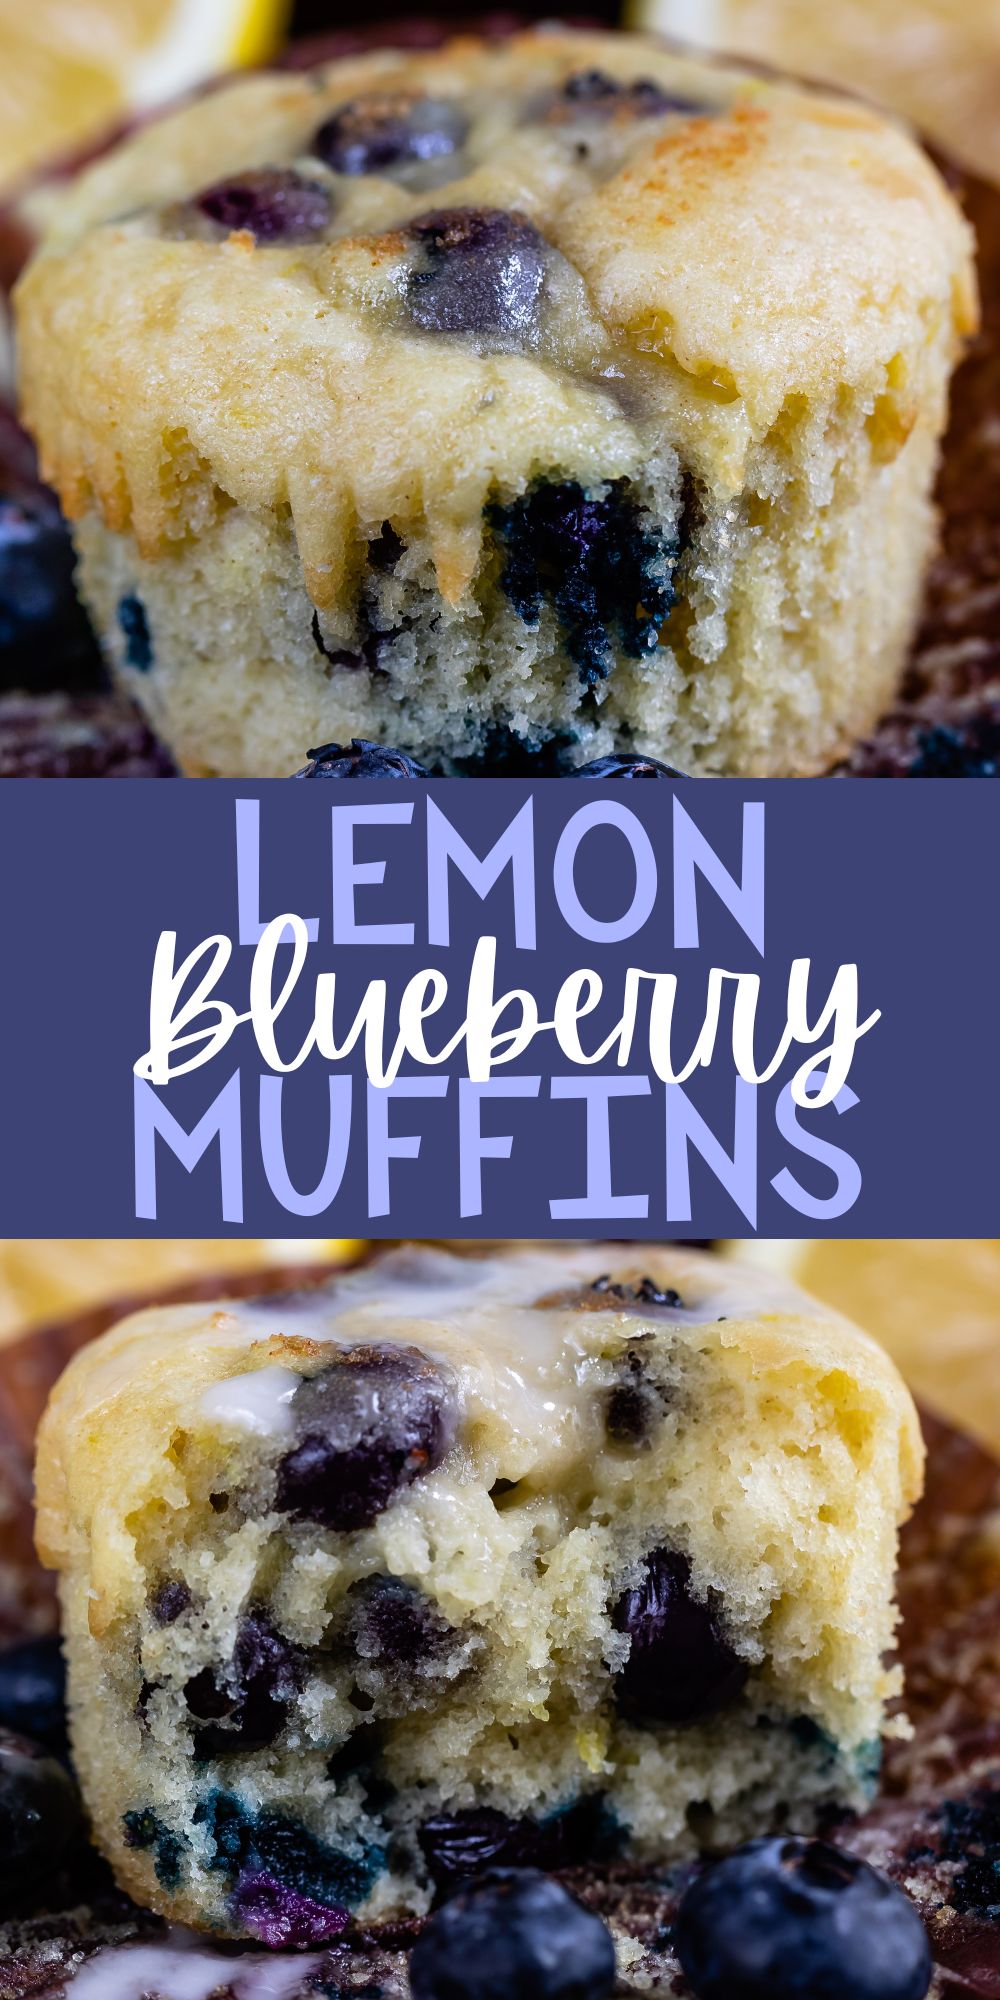 two photos of muffins with blueberries baked in with words in the image.